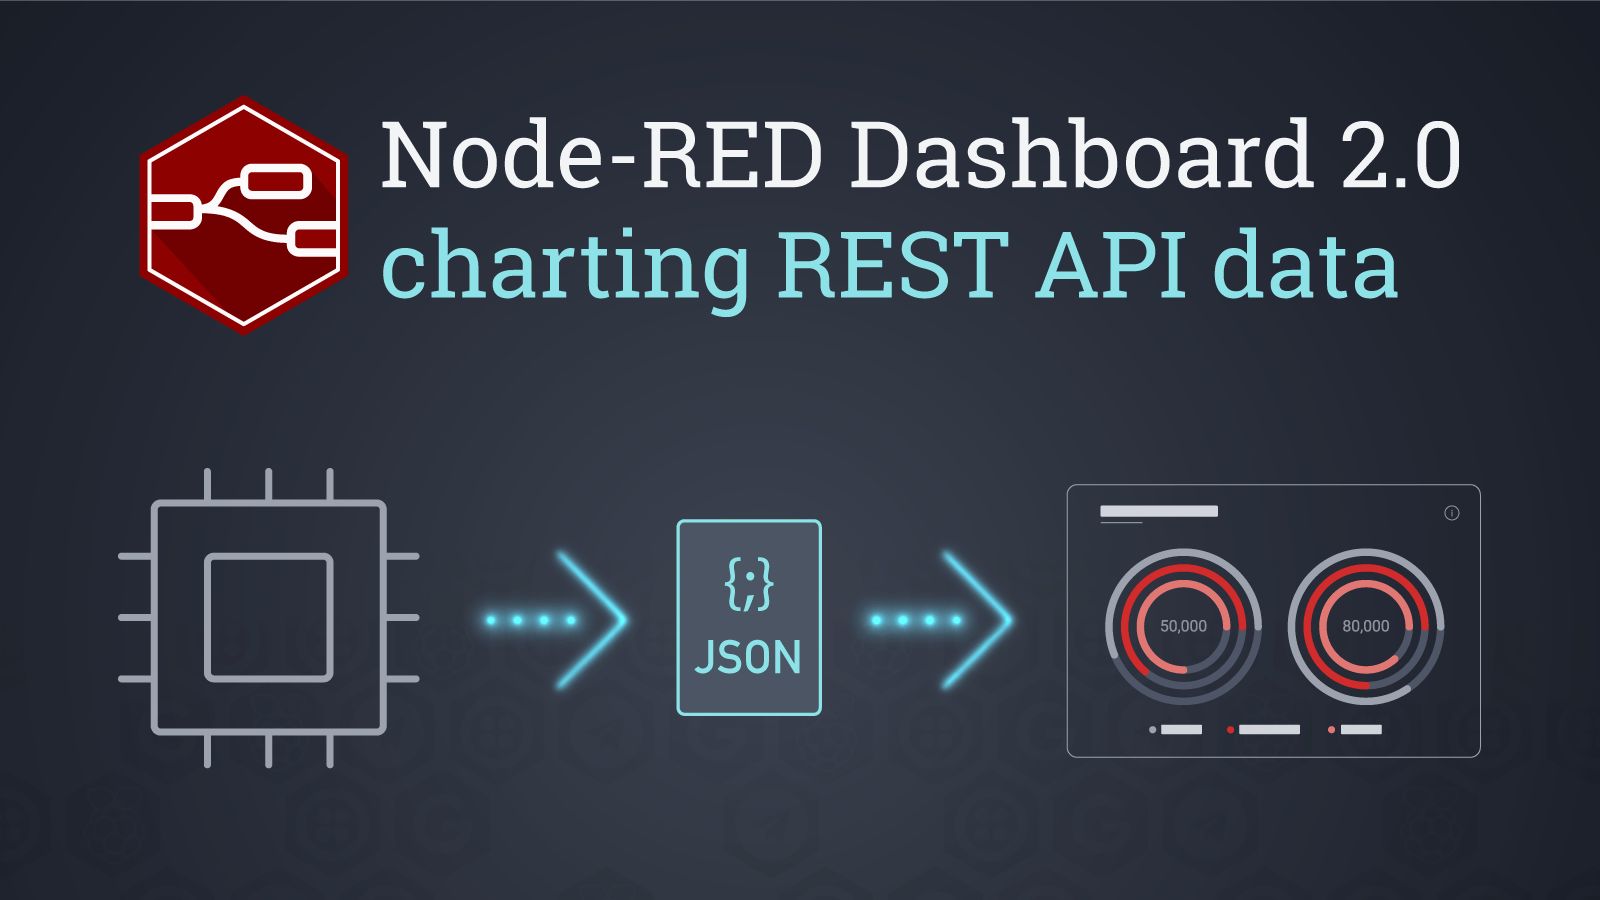 Image representing Charting REST API Data in a Dashboard